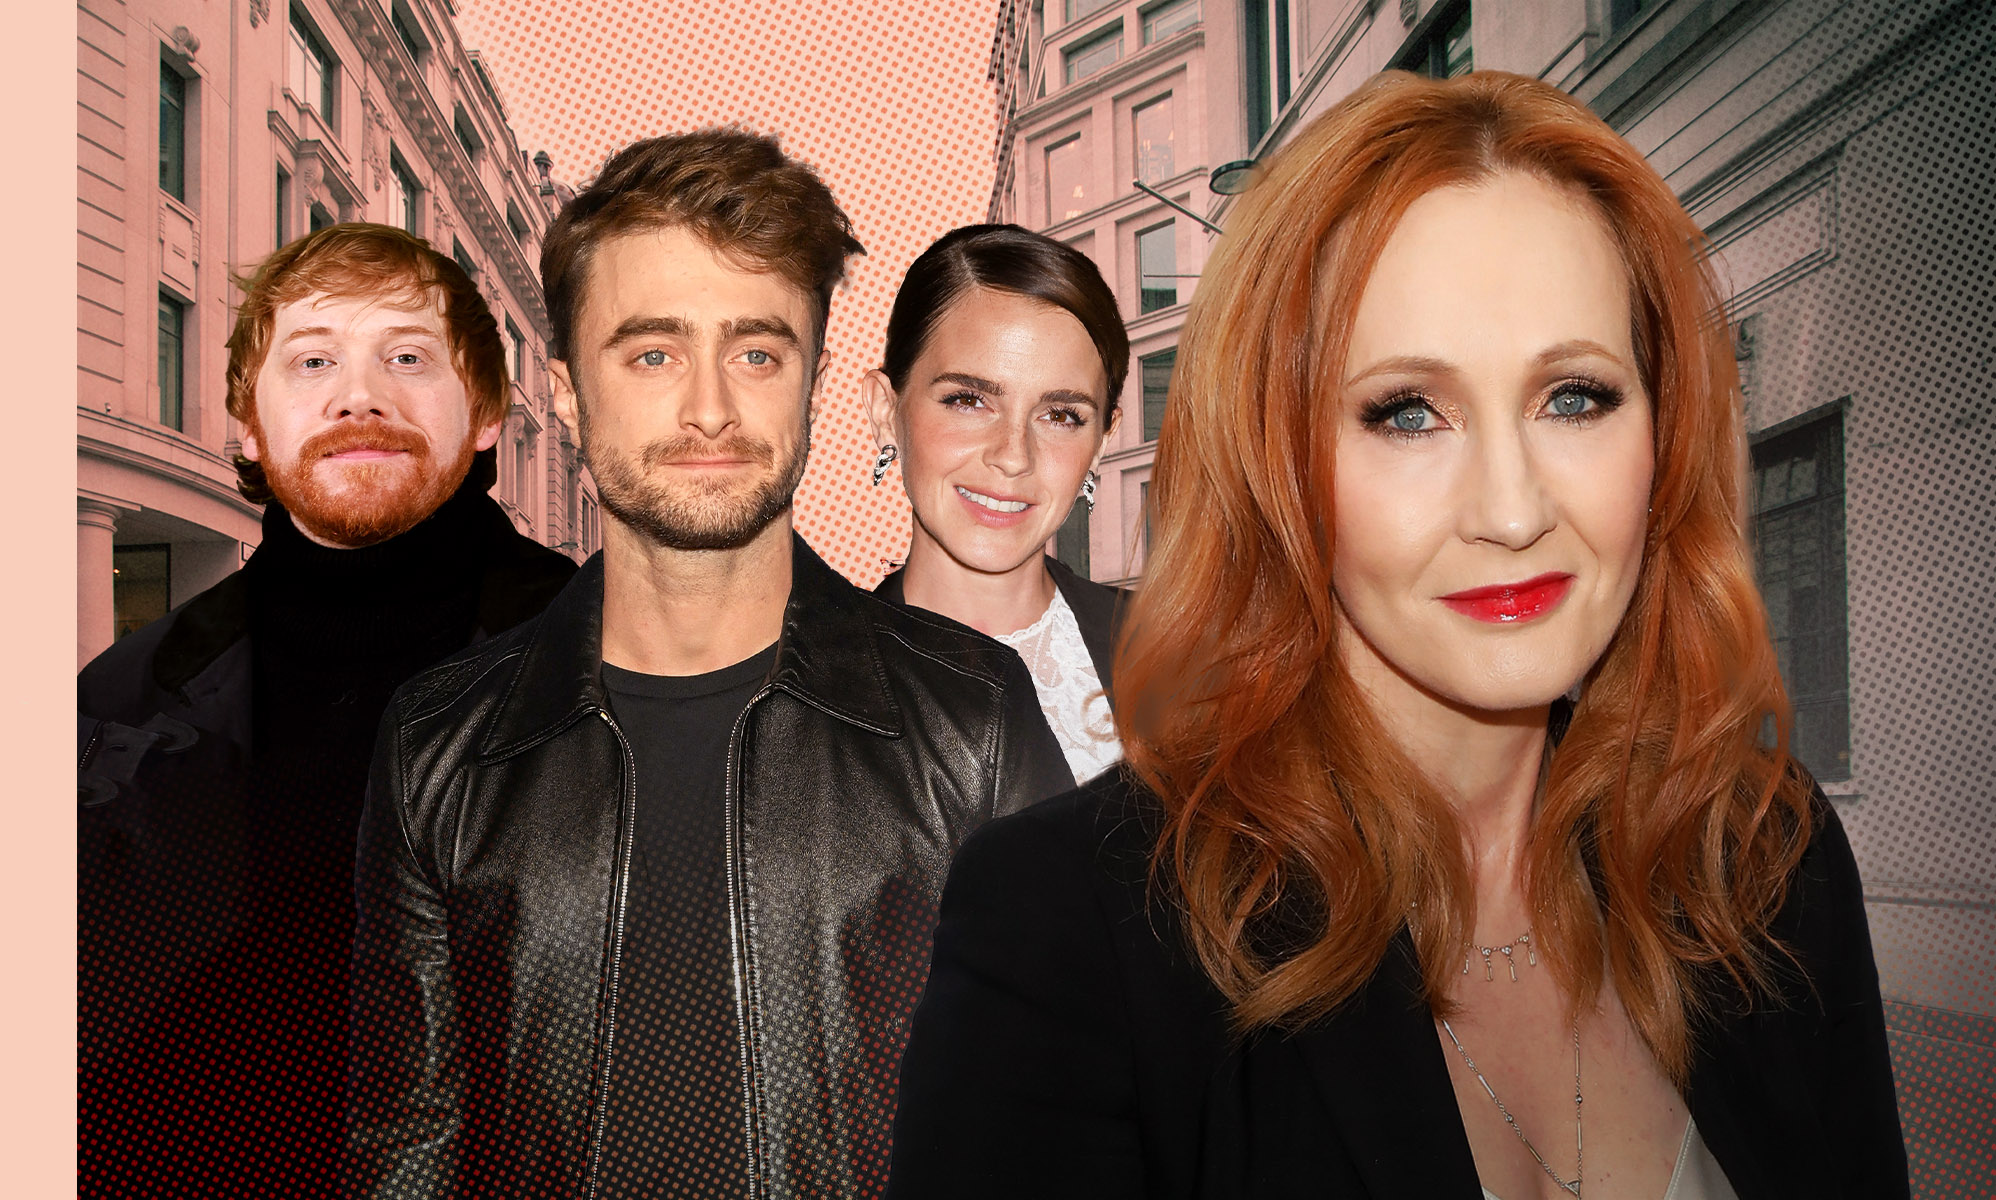 JK Rowling ‘won’t forgive’ Harry Potter stars Daniel Radcliffe and Emma Watson for trans rights support